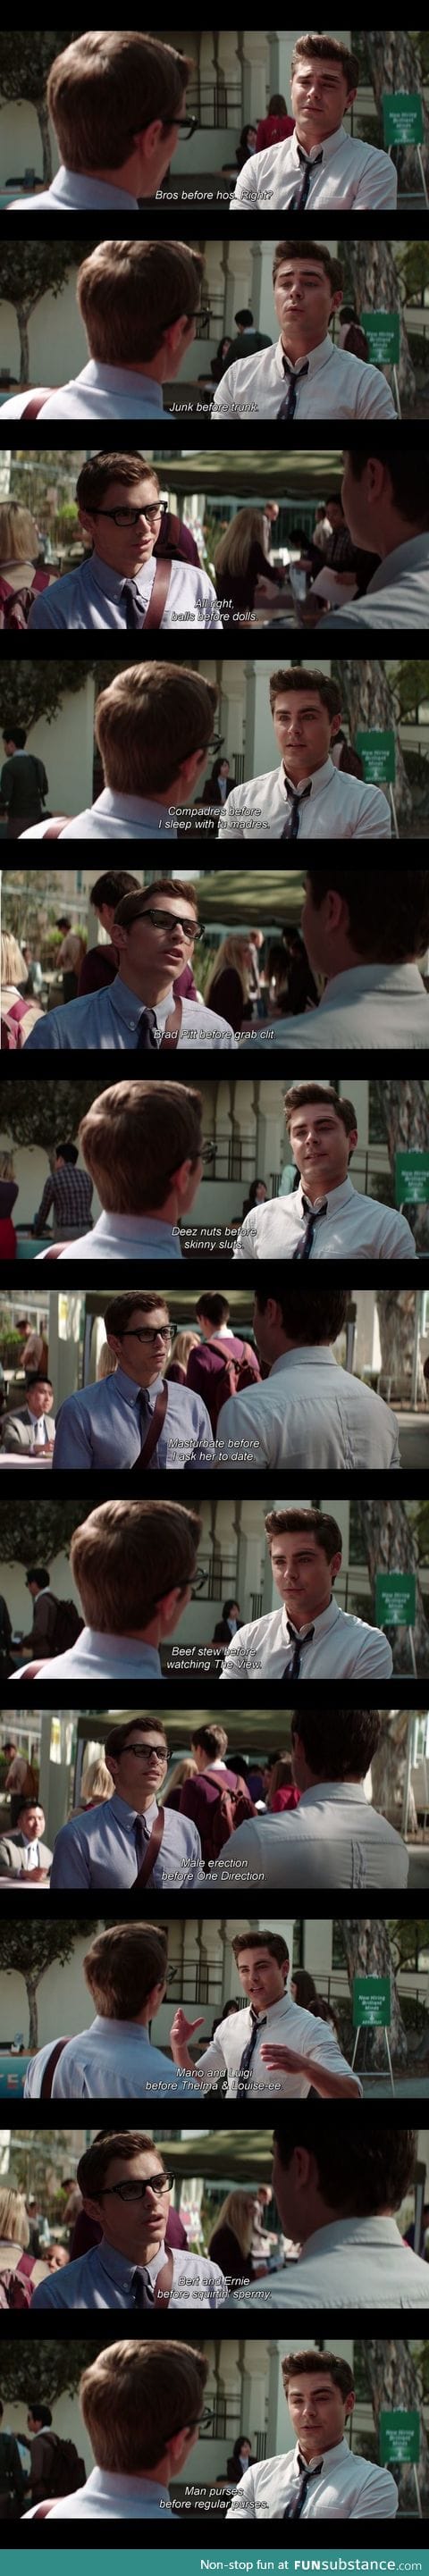 Zac and Dave in Neighbors